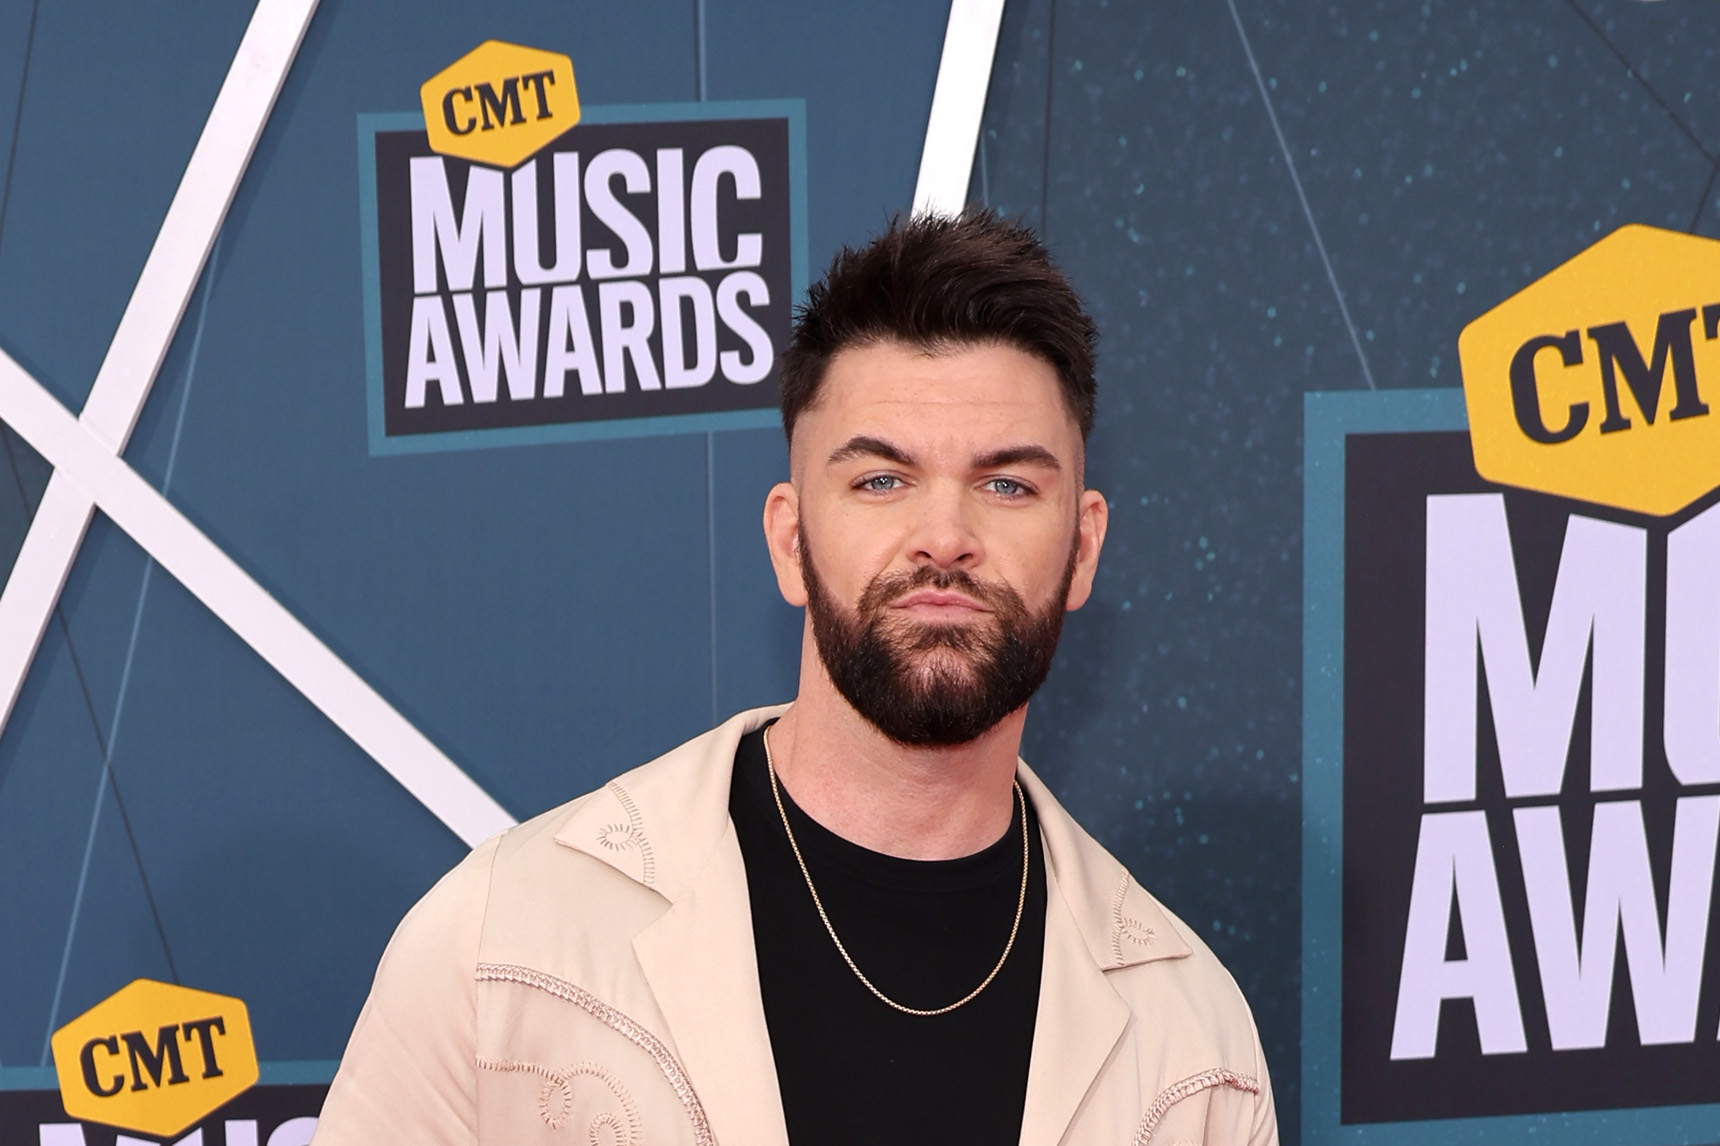 Dylan Scott at the 2022 CMT Music Awards in Nashville, Tennessee. | Source: Getty Images